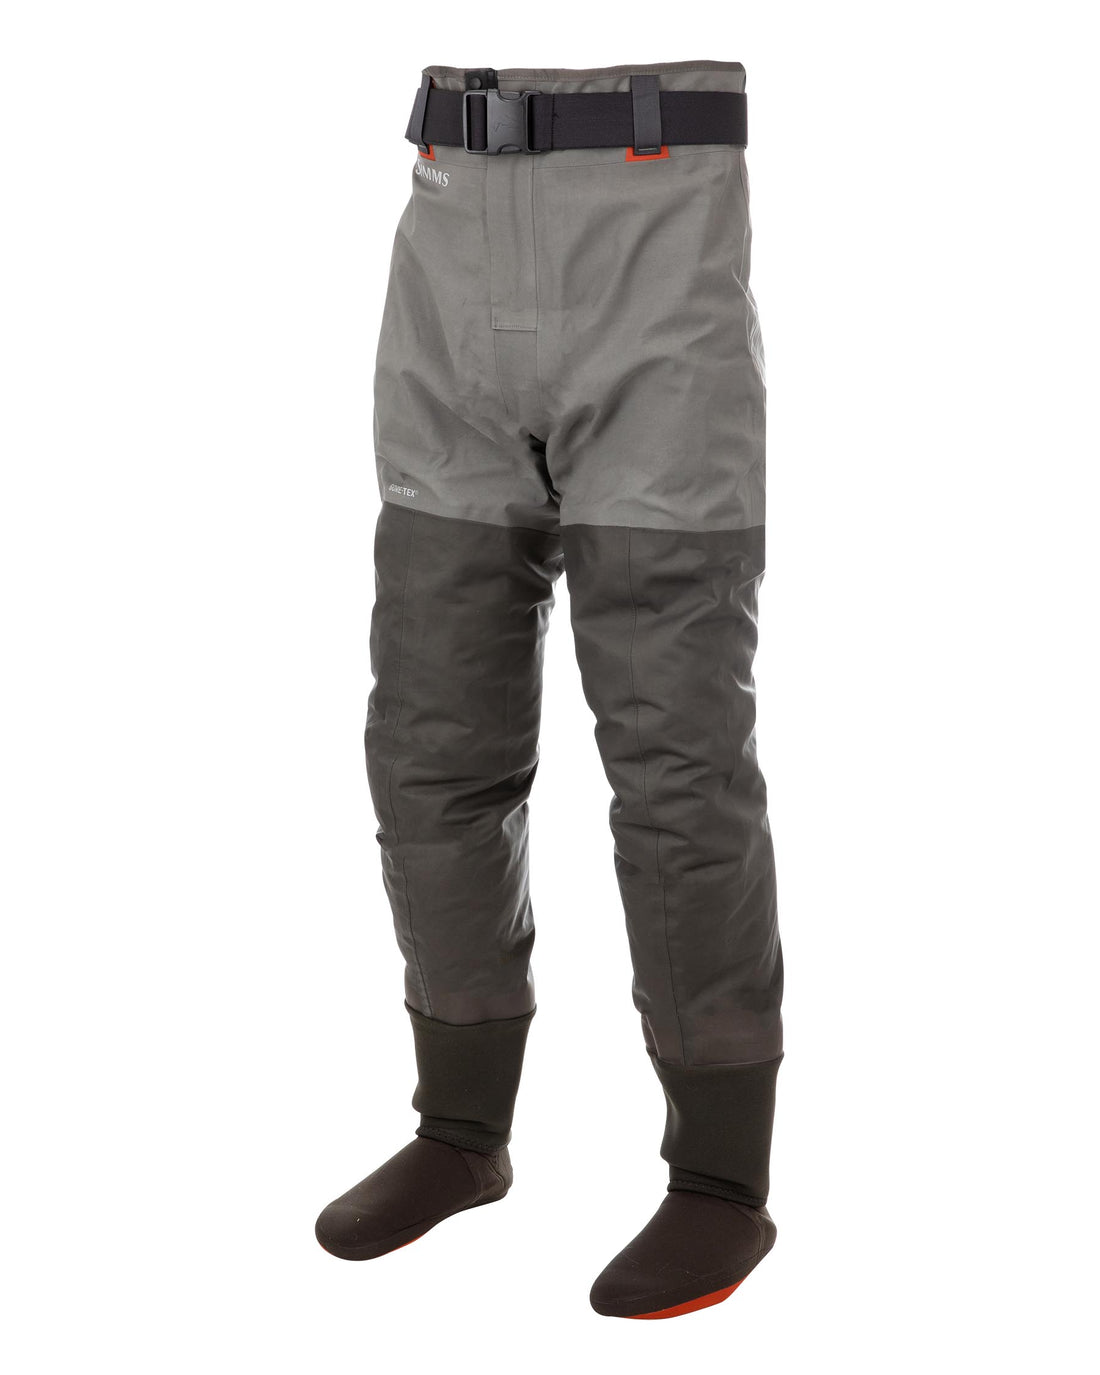 G3 Guide Pant - ( SIMMS) - Blue Quill Angler